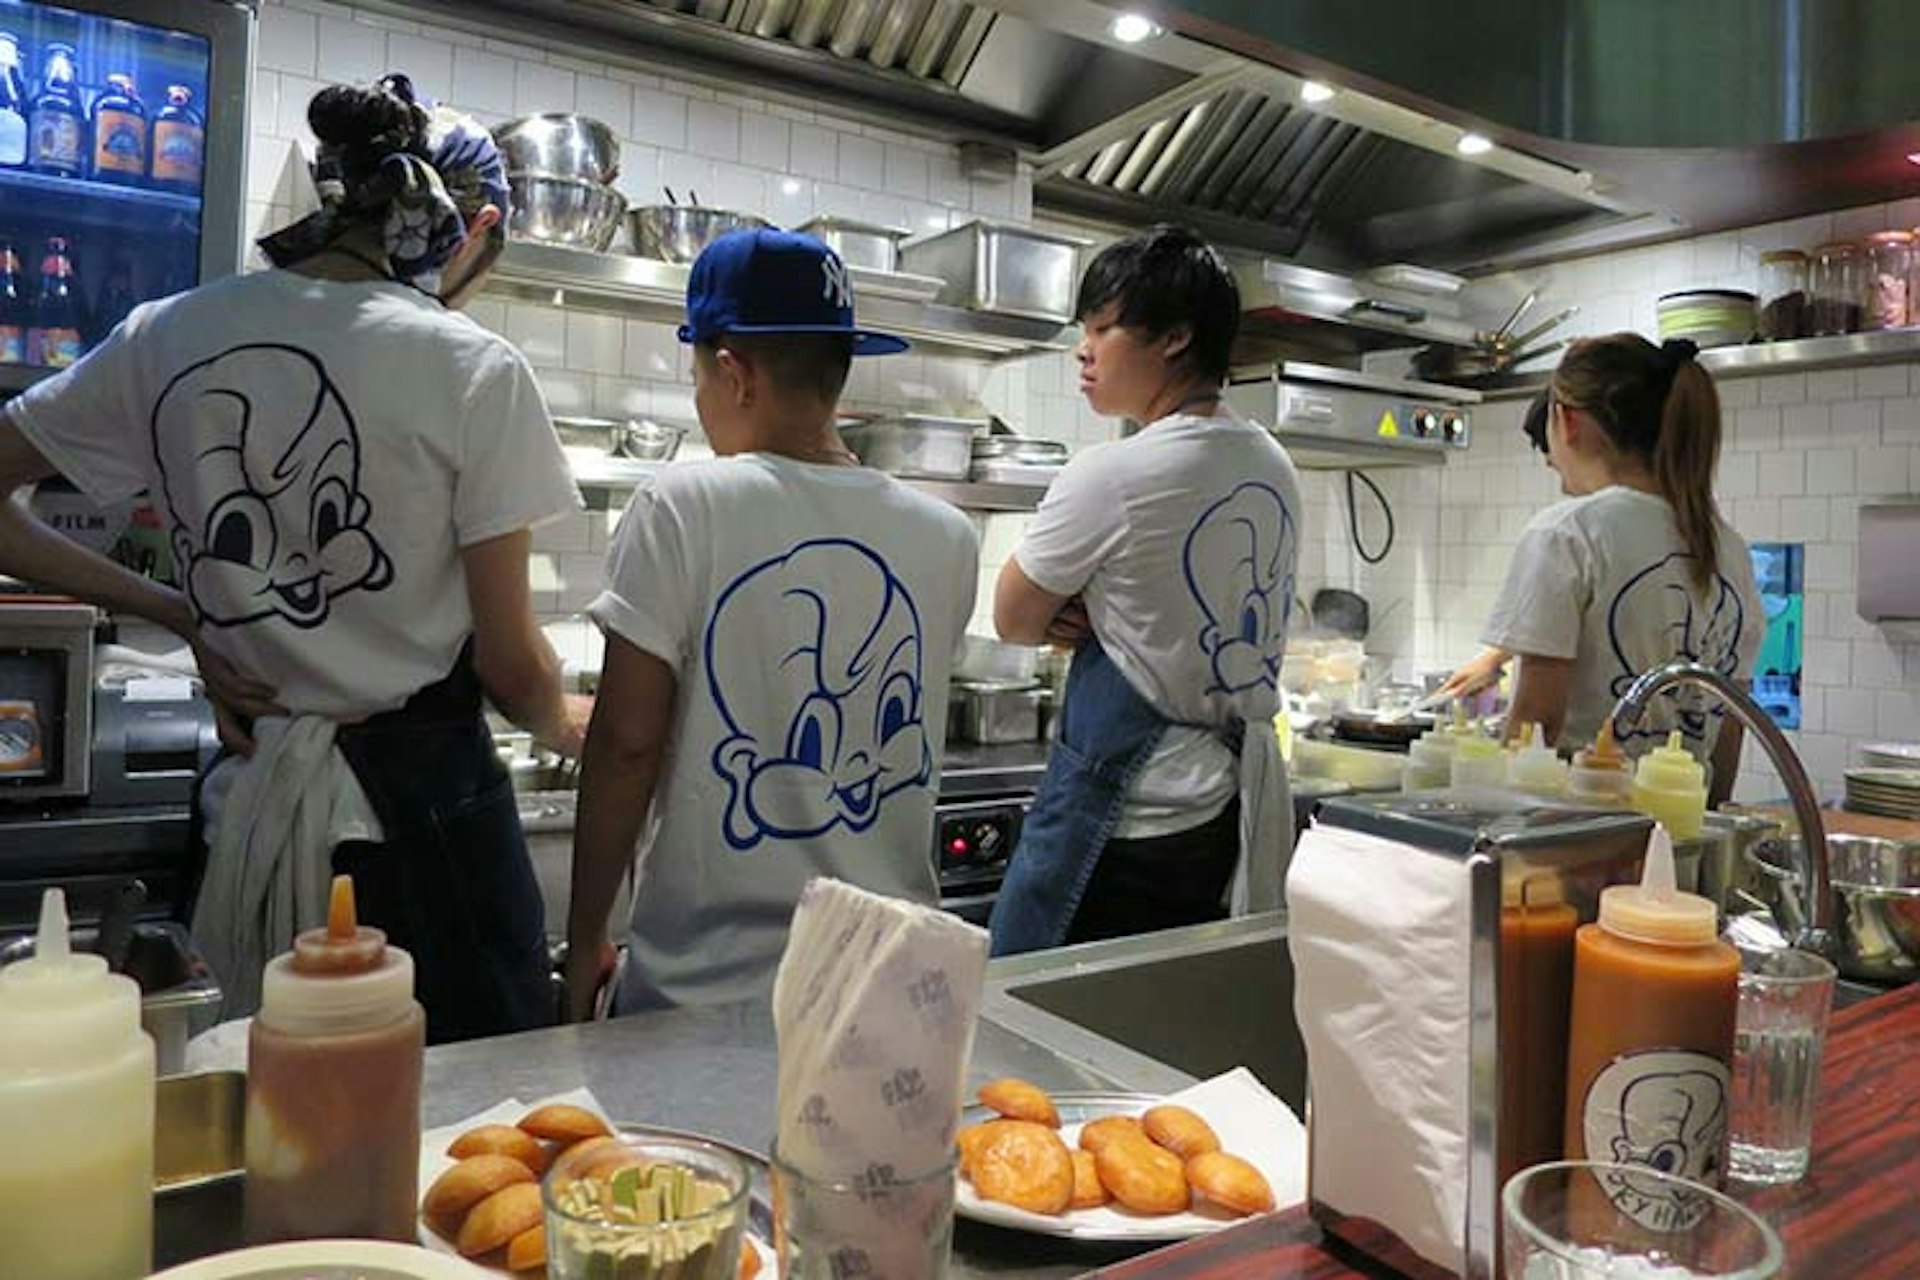 Chef May Chow and staff at Little Bao. Image by Megan Eaves / Lonely Planet